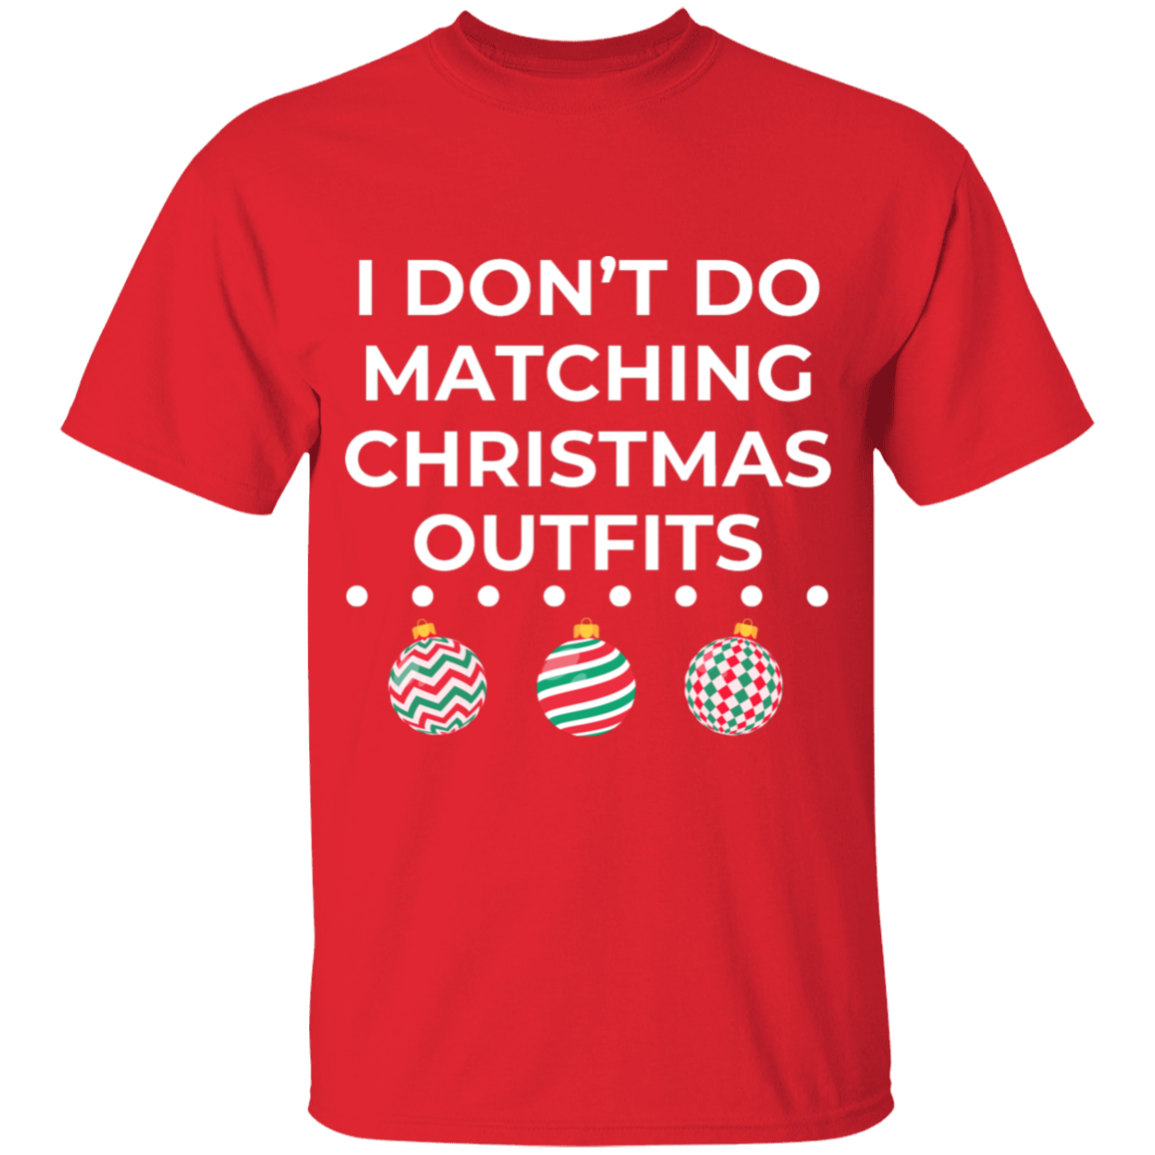 I Don't Do Matching Christmas Outfits Shirt